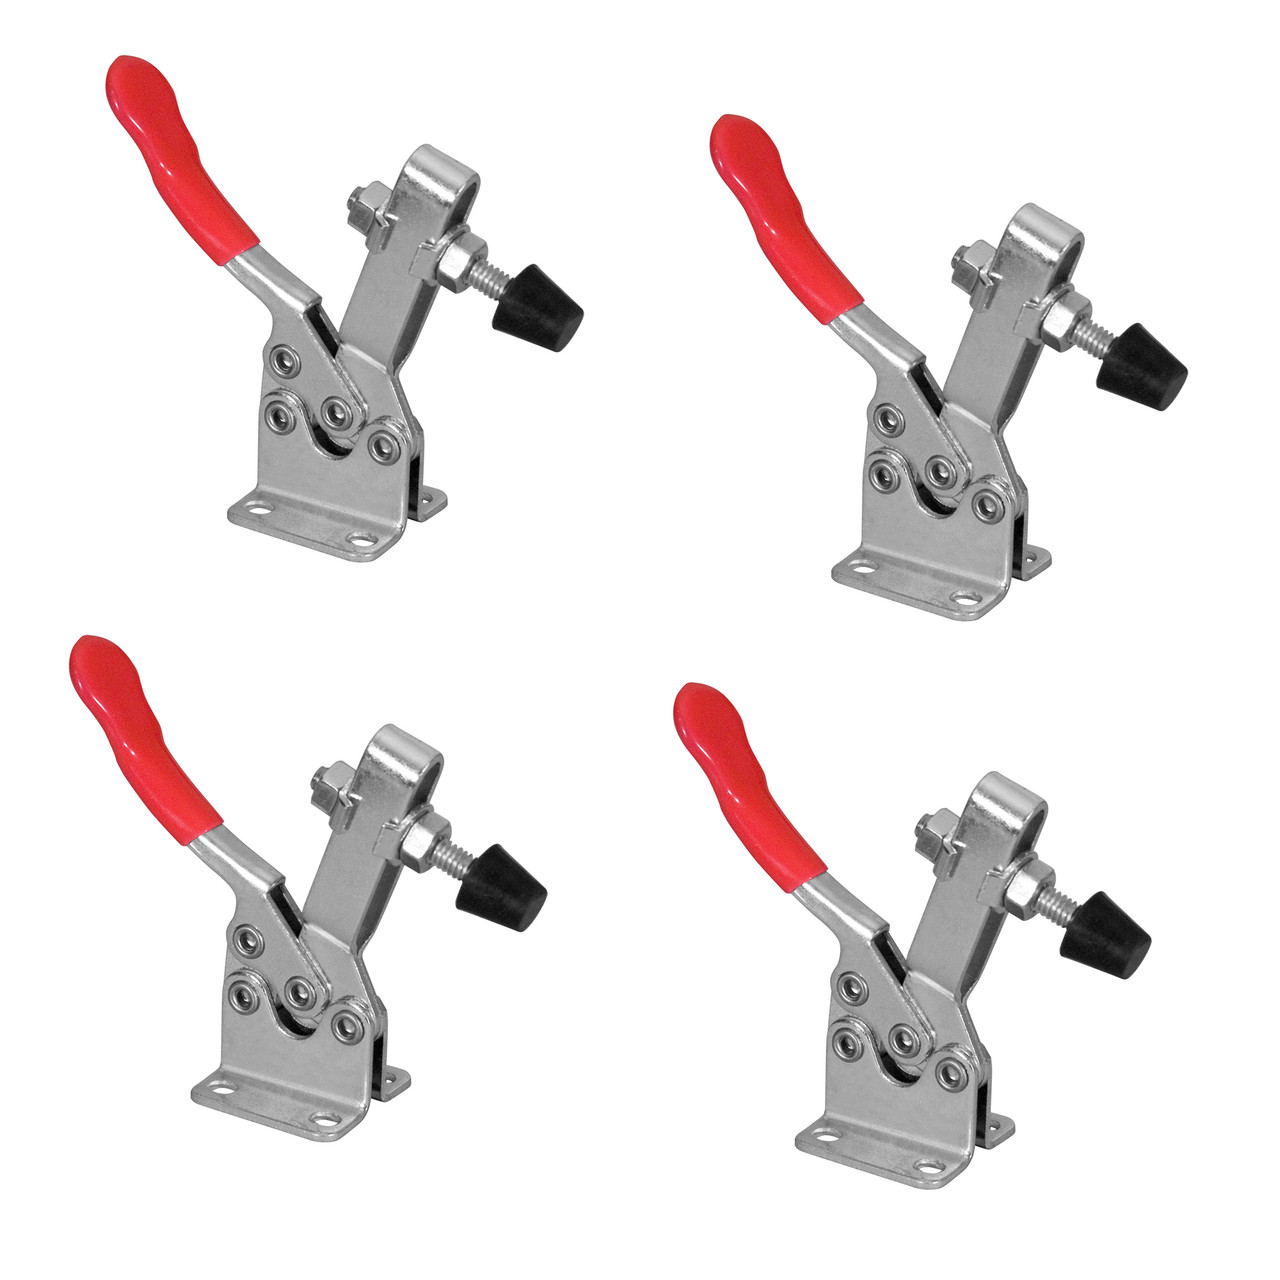 POWERTEC 20327 Quick Release Horizontal Toggle Clamp 201B - 300 lb Holding Capacity W Rubber Pressure Tip 4pk